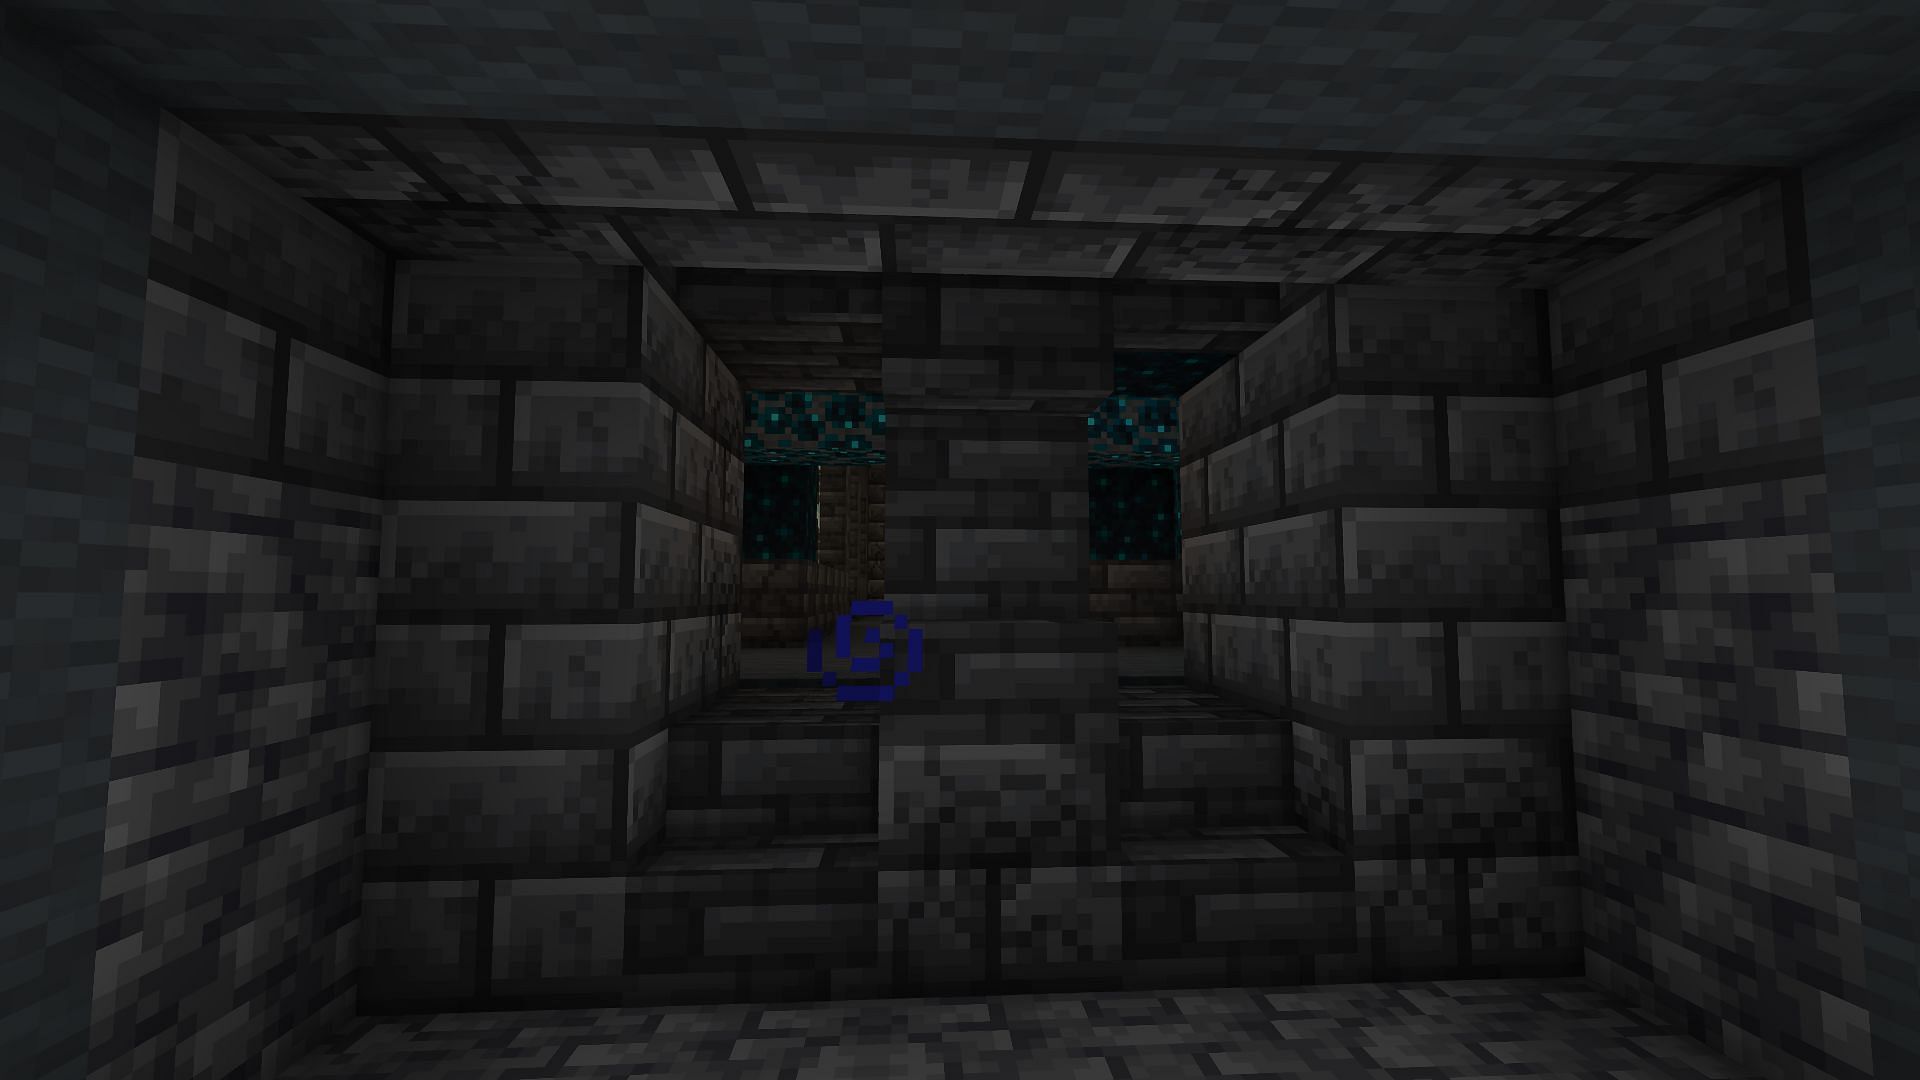 Where the secret doors can be found, though they are open in this example (Image via Minecraft)